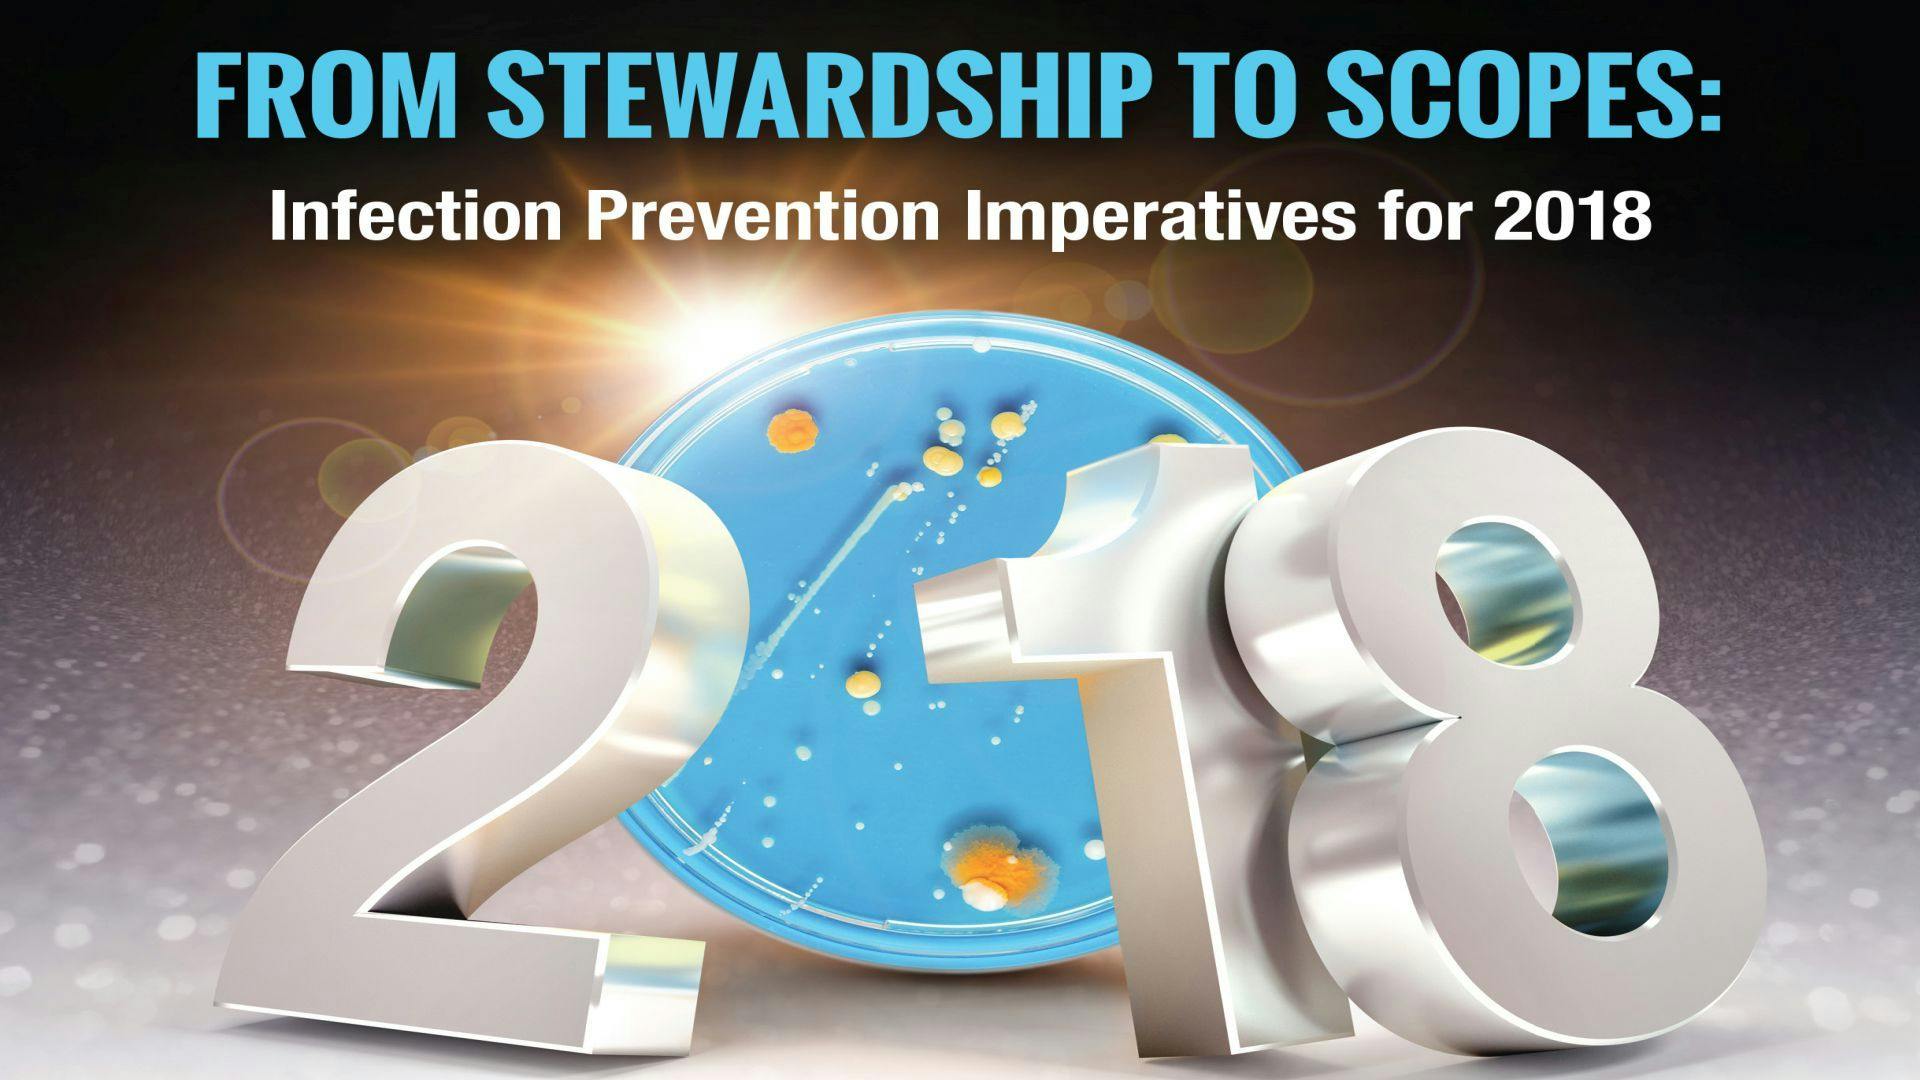 From Stewardship to Scopes: Infection Prevention Imperatives for 2018